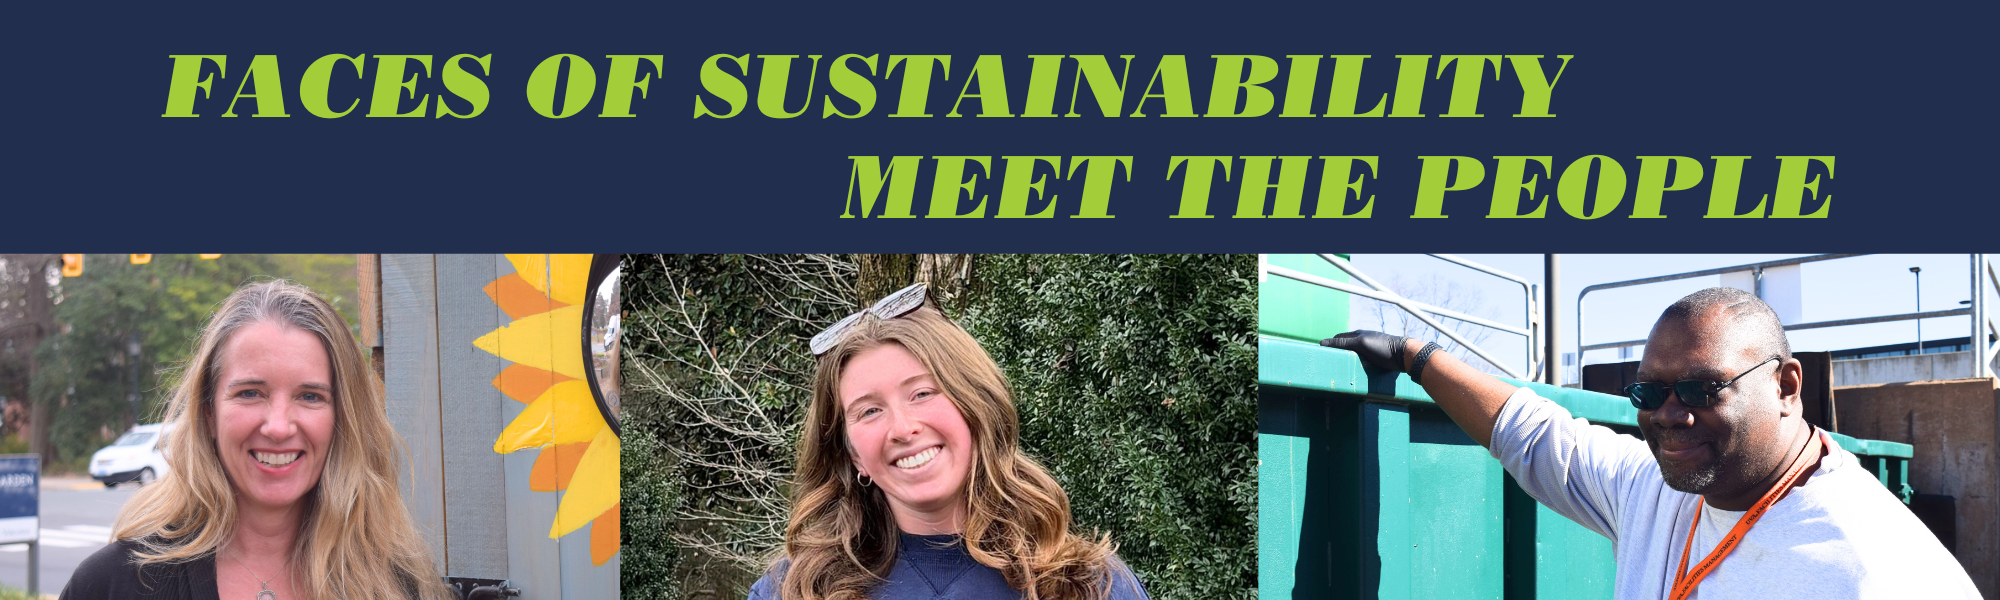 Faces of Sustainability Meet the People Graphic Three faces smiling